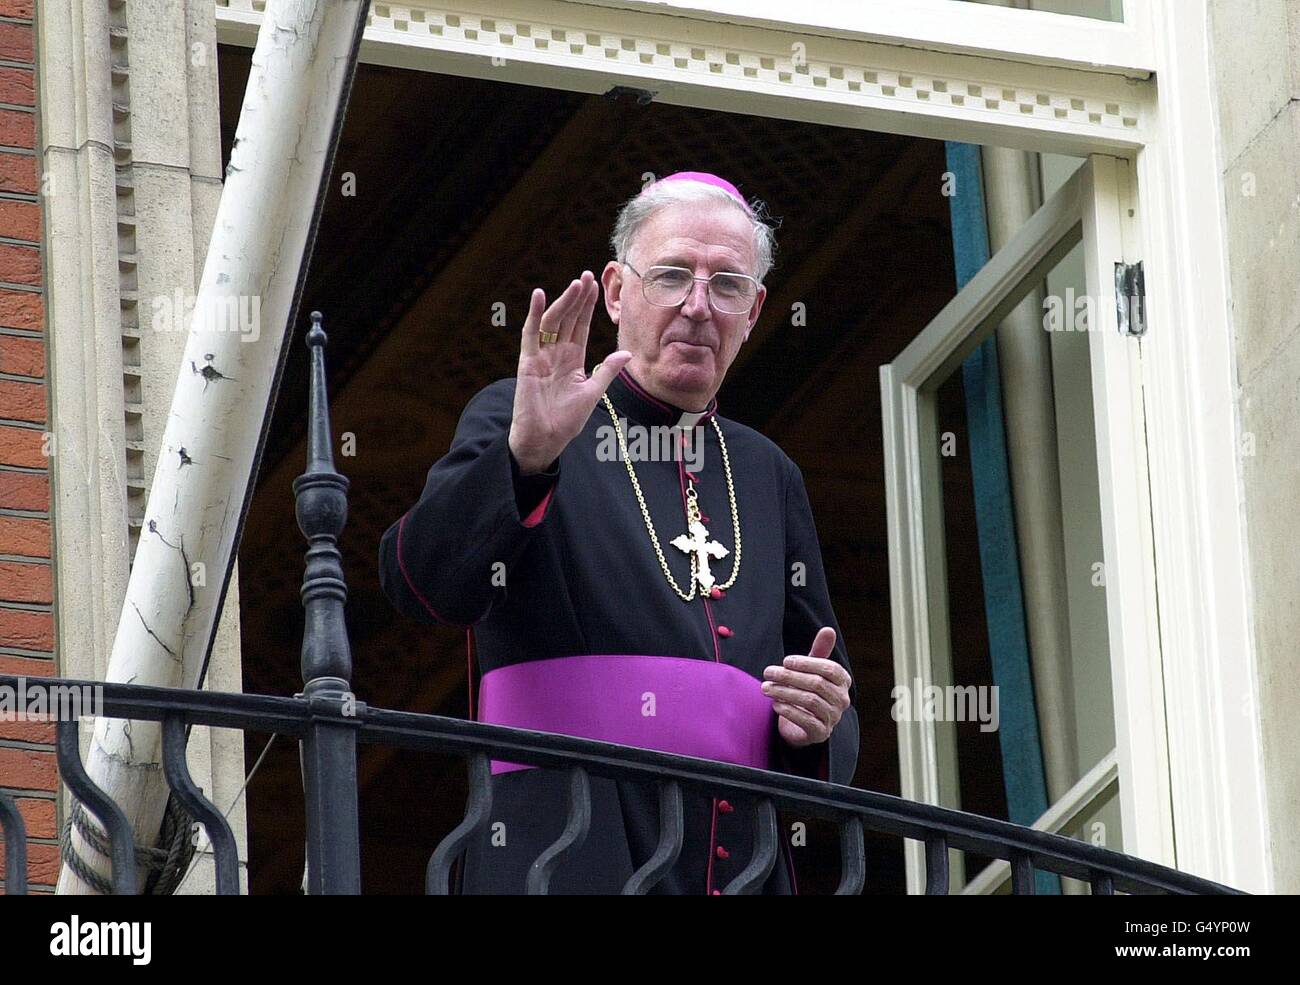 The new Archbishop of Westminster, the Most Rev Cormac Murphy-O'Connor, waves to well-wishers outside Westminster Cathedral in London, after his Installation Mass as head of the Roman Catholic church in England and Wales. * 14/9/2000: The Archbishop was telling the court wrestling with the fate of Siamese twins that they should both be allowed to die. In a written submission to the Court of Appeal, the leader of Roman Catholics in England and Wales was saying the pair should not be separated if that will lead to the death of one of the sisters. Doctors have told the court that they can save Stock Photo